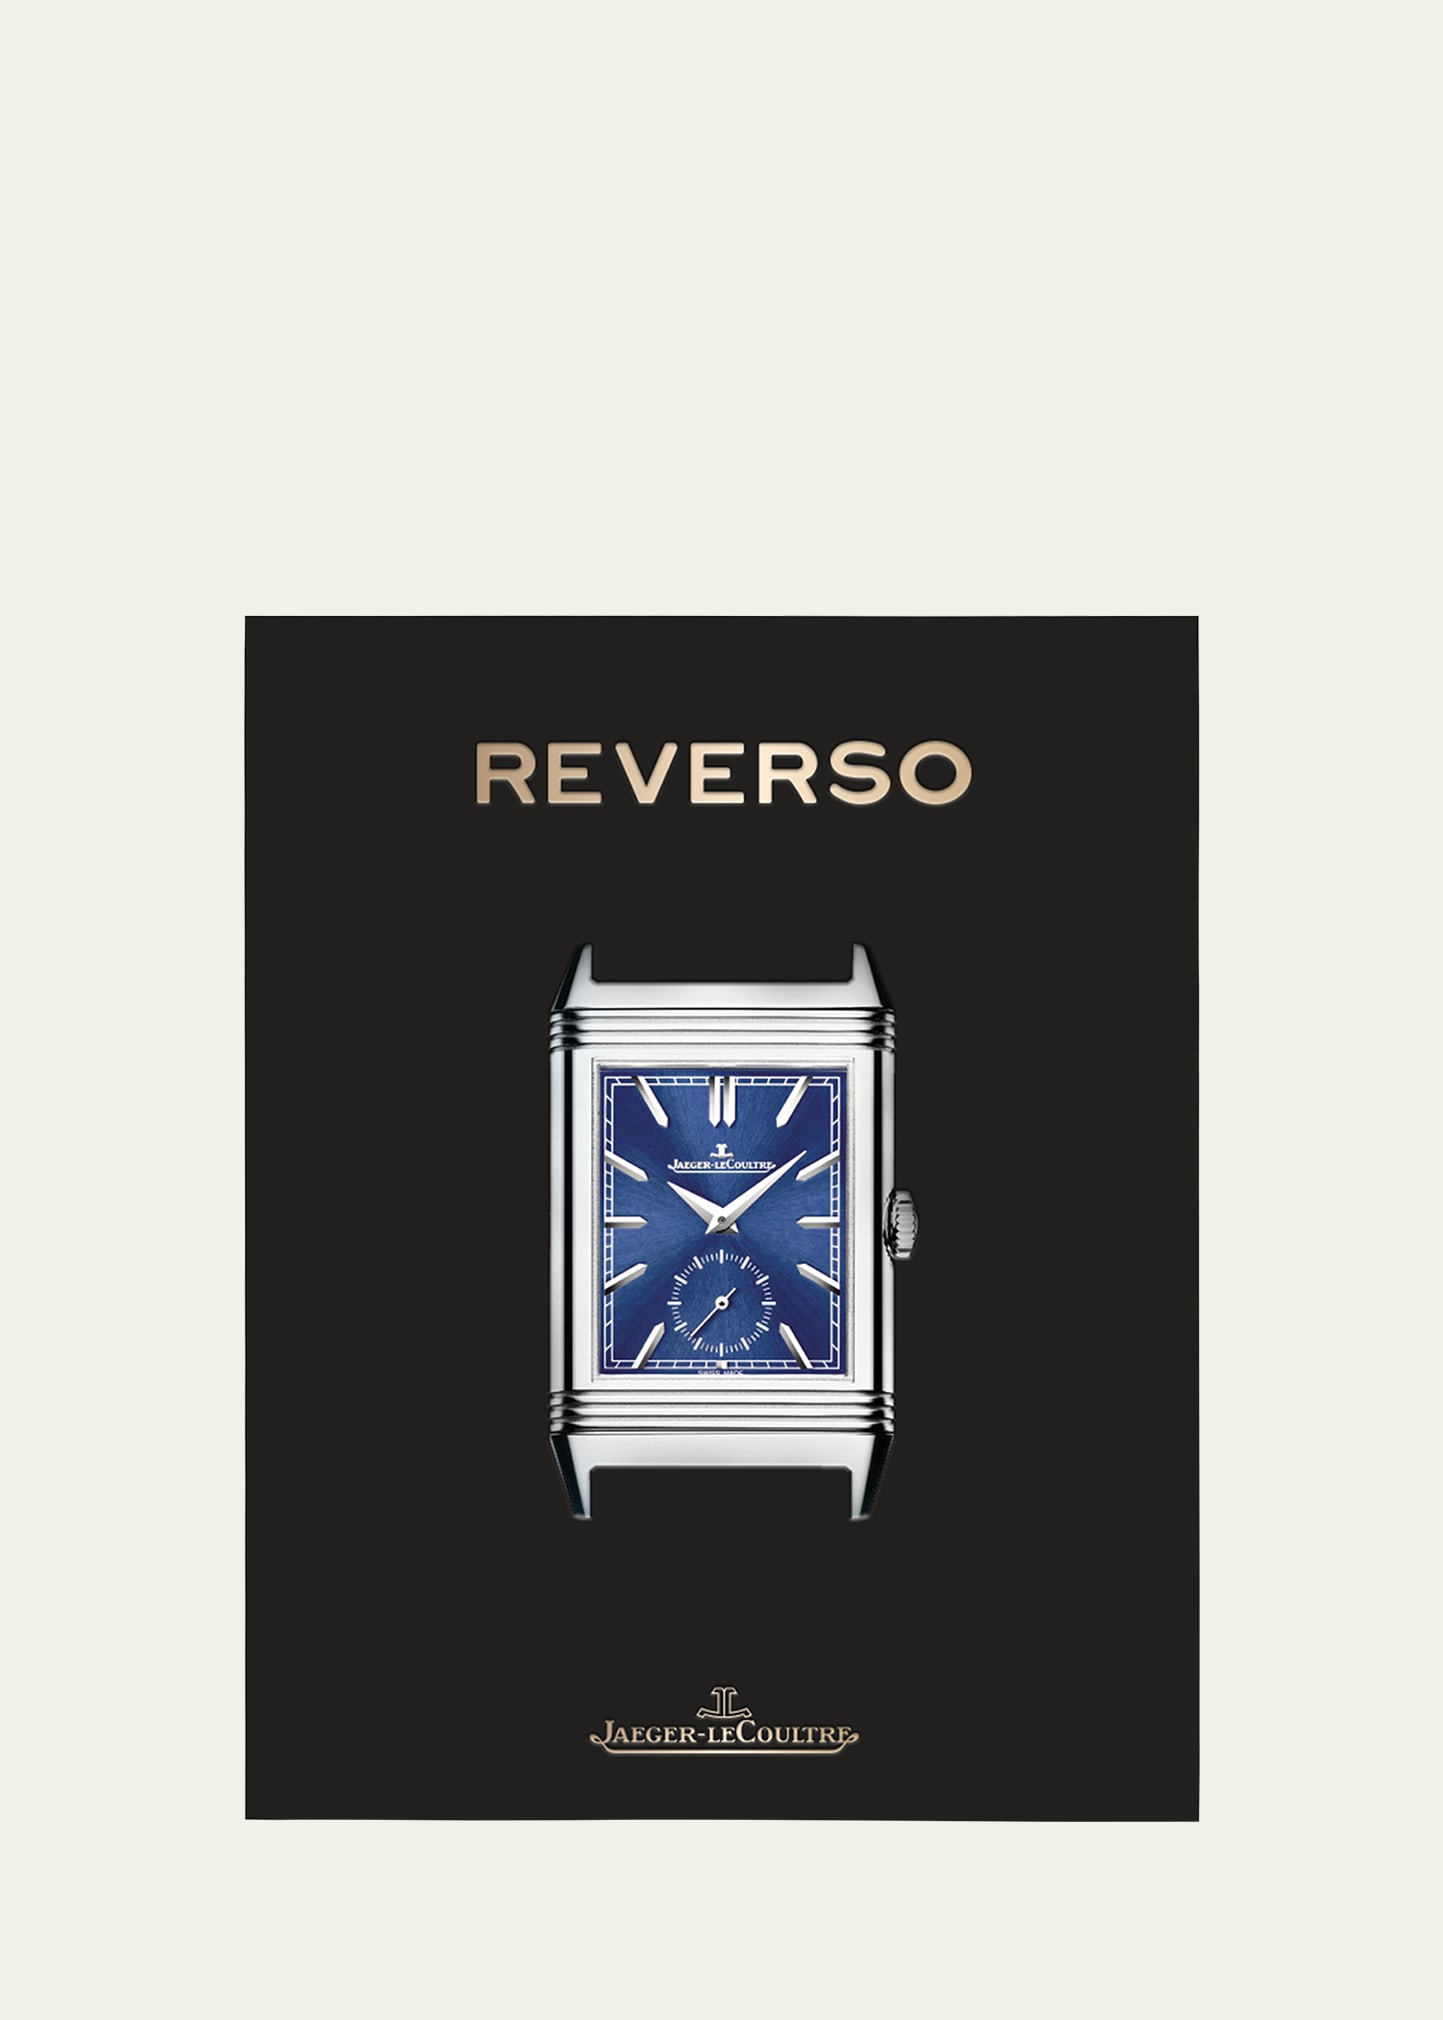 Jaeger-LeCoultre: Reverso Book by Nicholas Foulkes